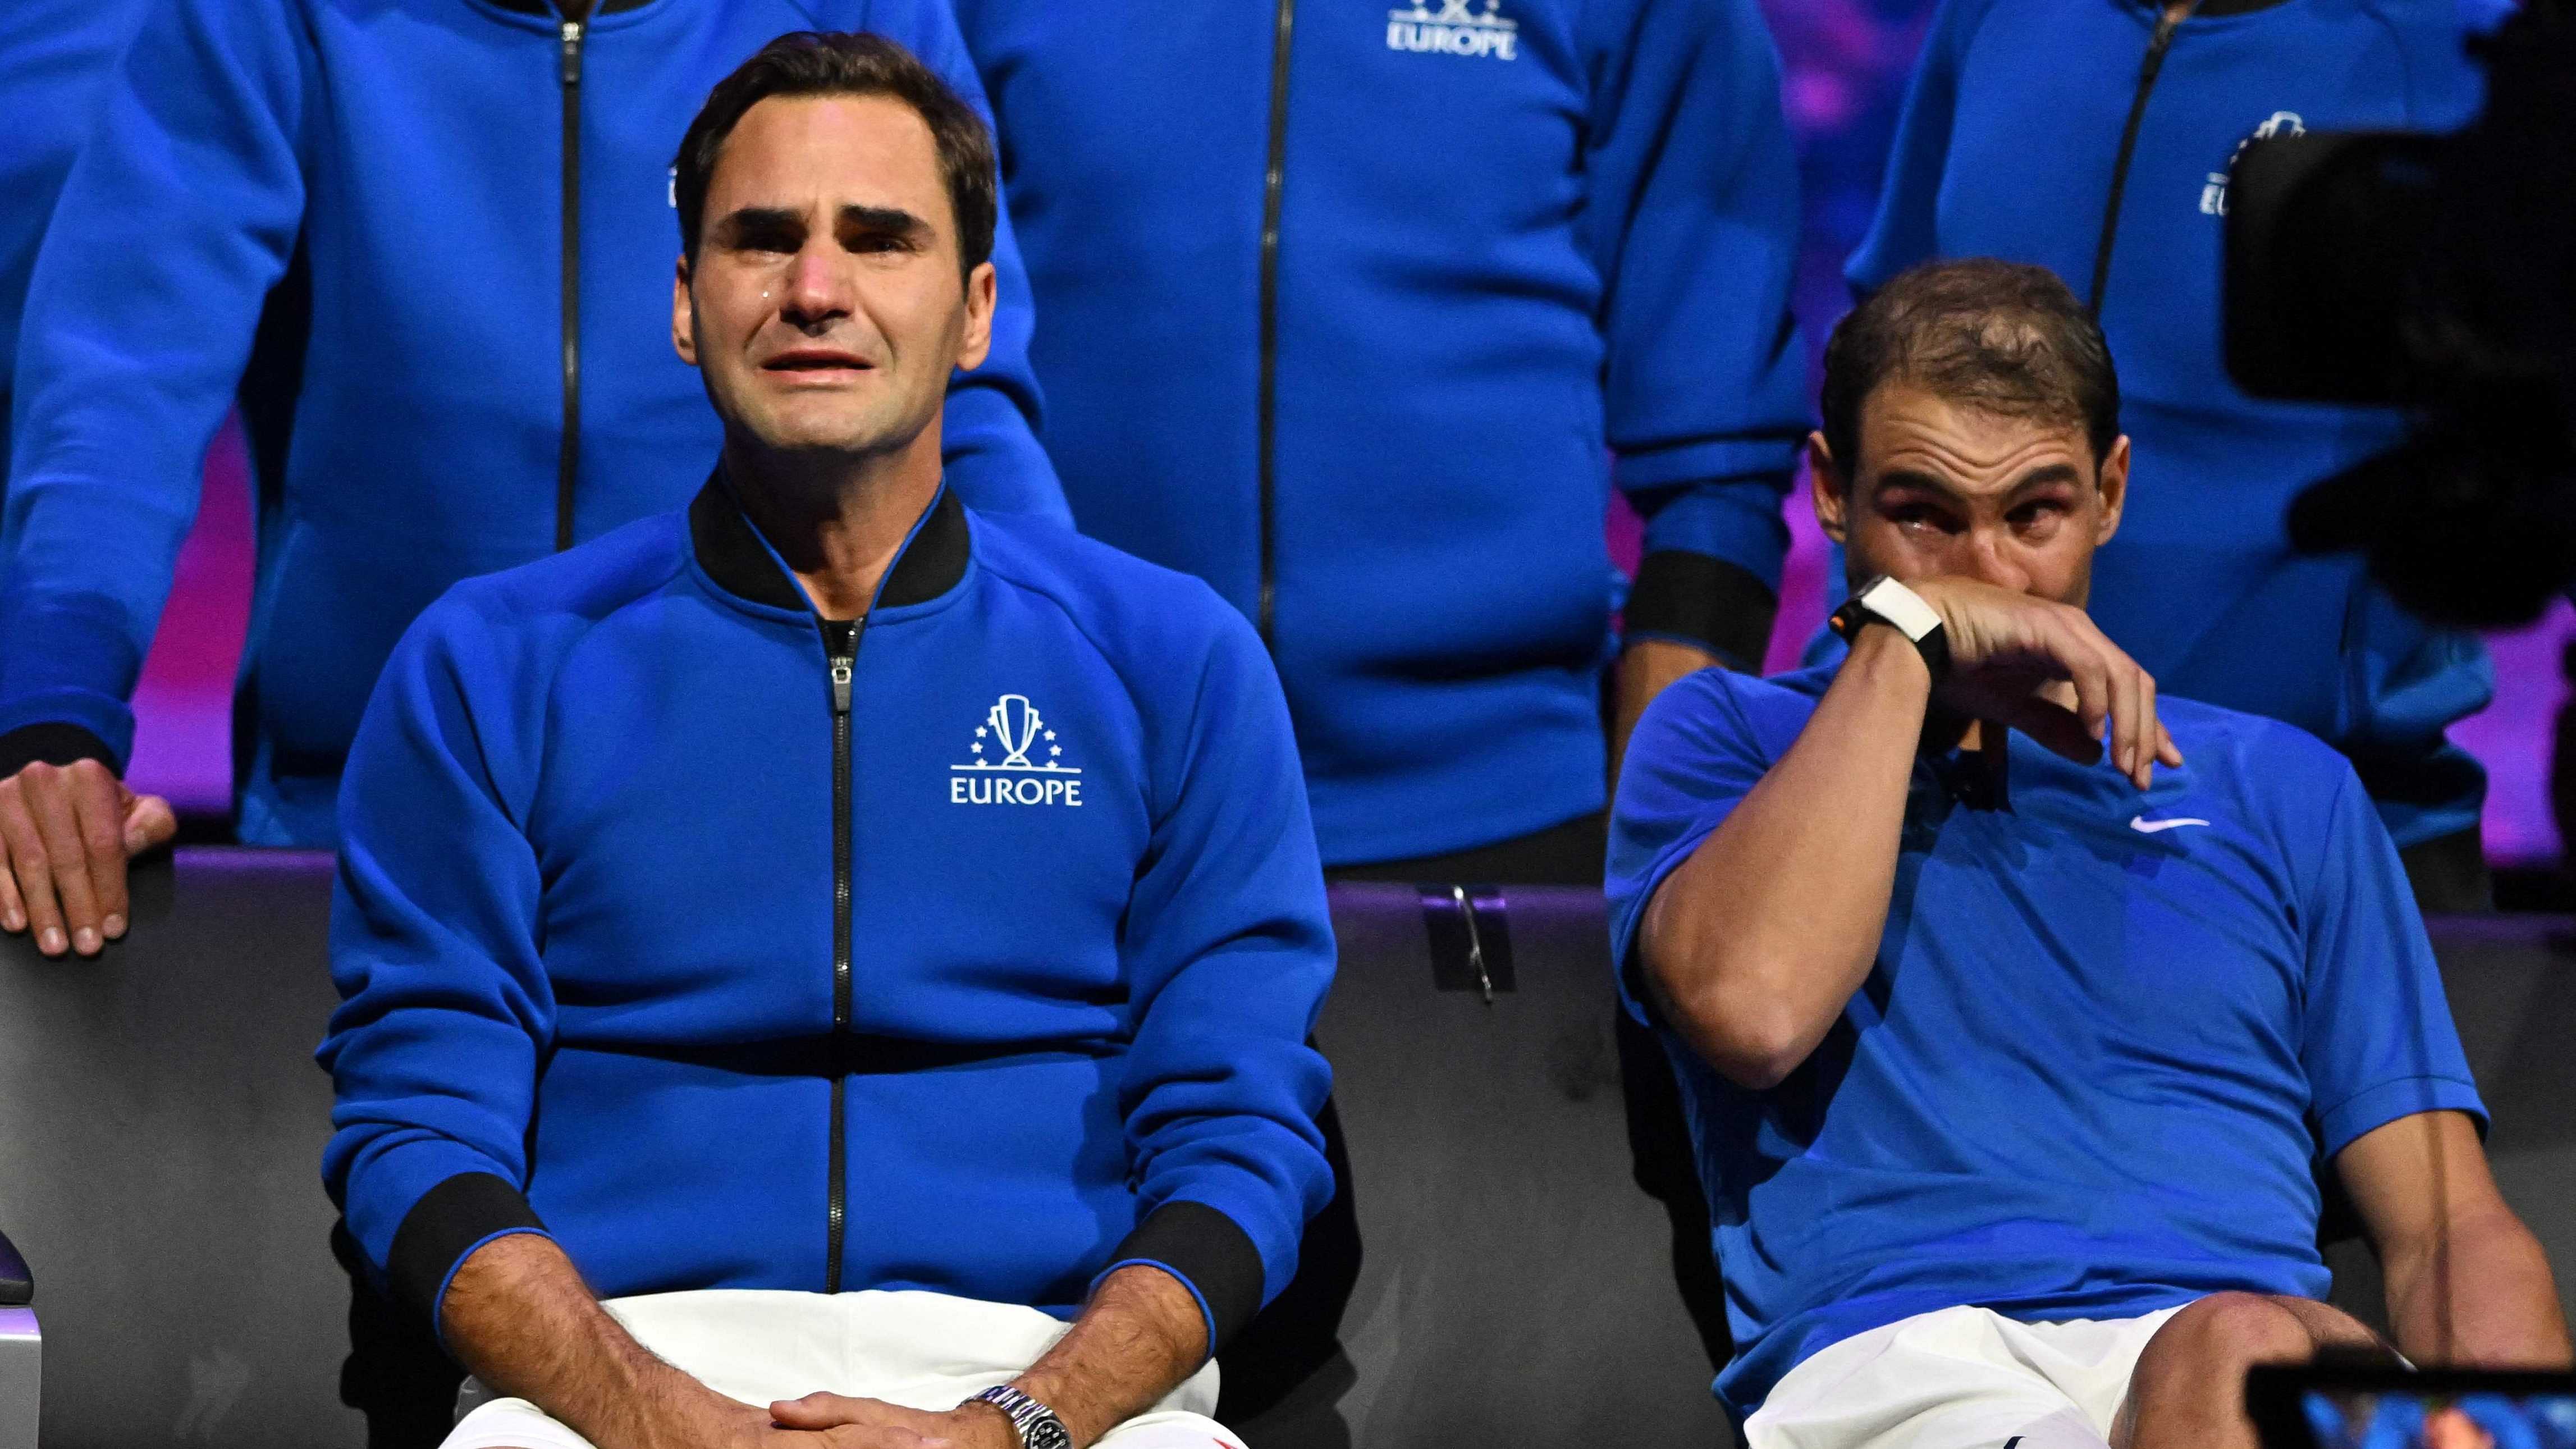 Roger Federer brings the curtain down on his spectacular career in a "super special" match alongside long-time rival Rafael Nadal at the Laver Cup in London on Friday. Credit: AFP Photo